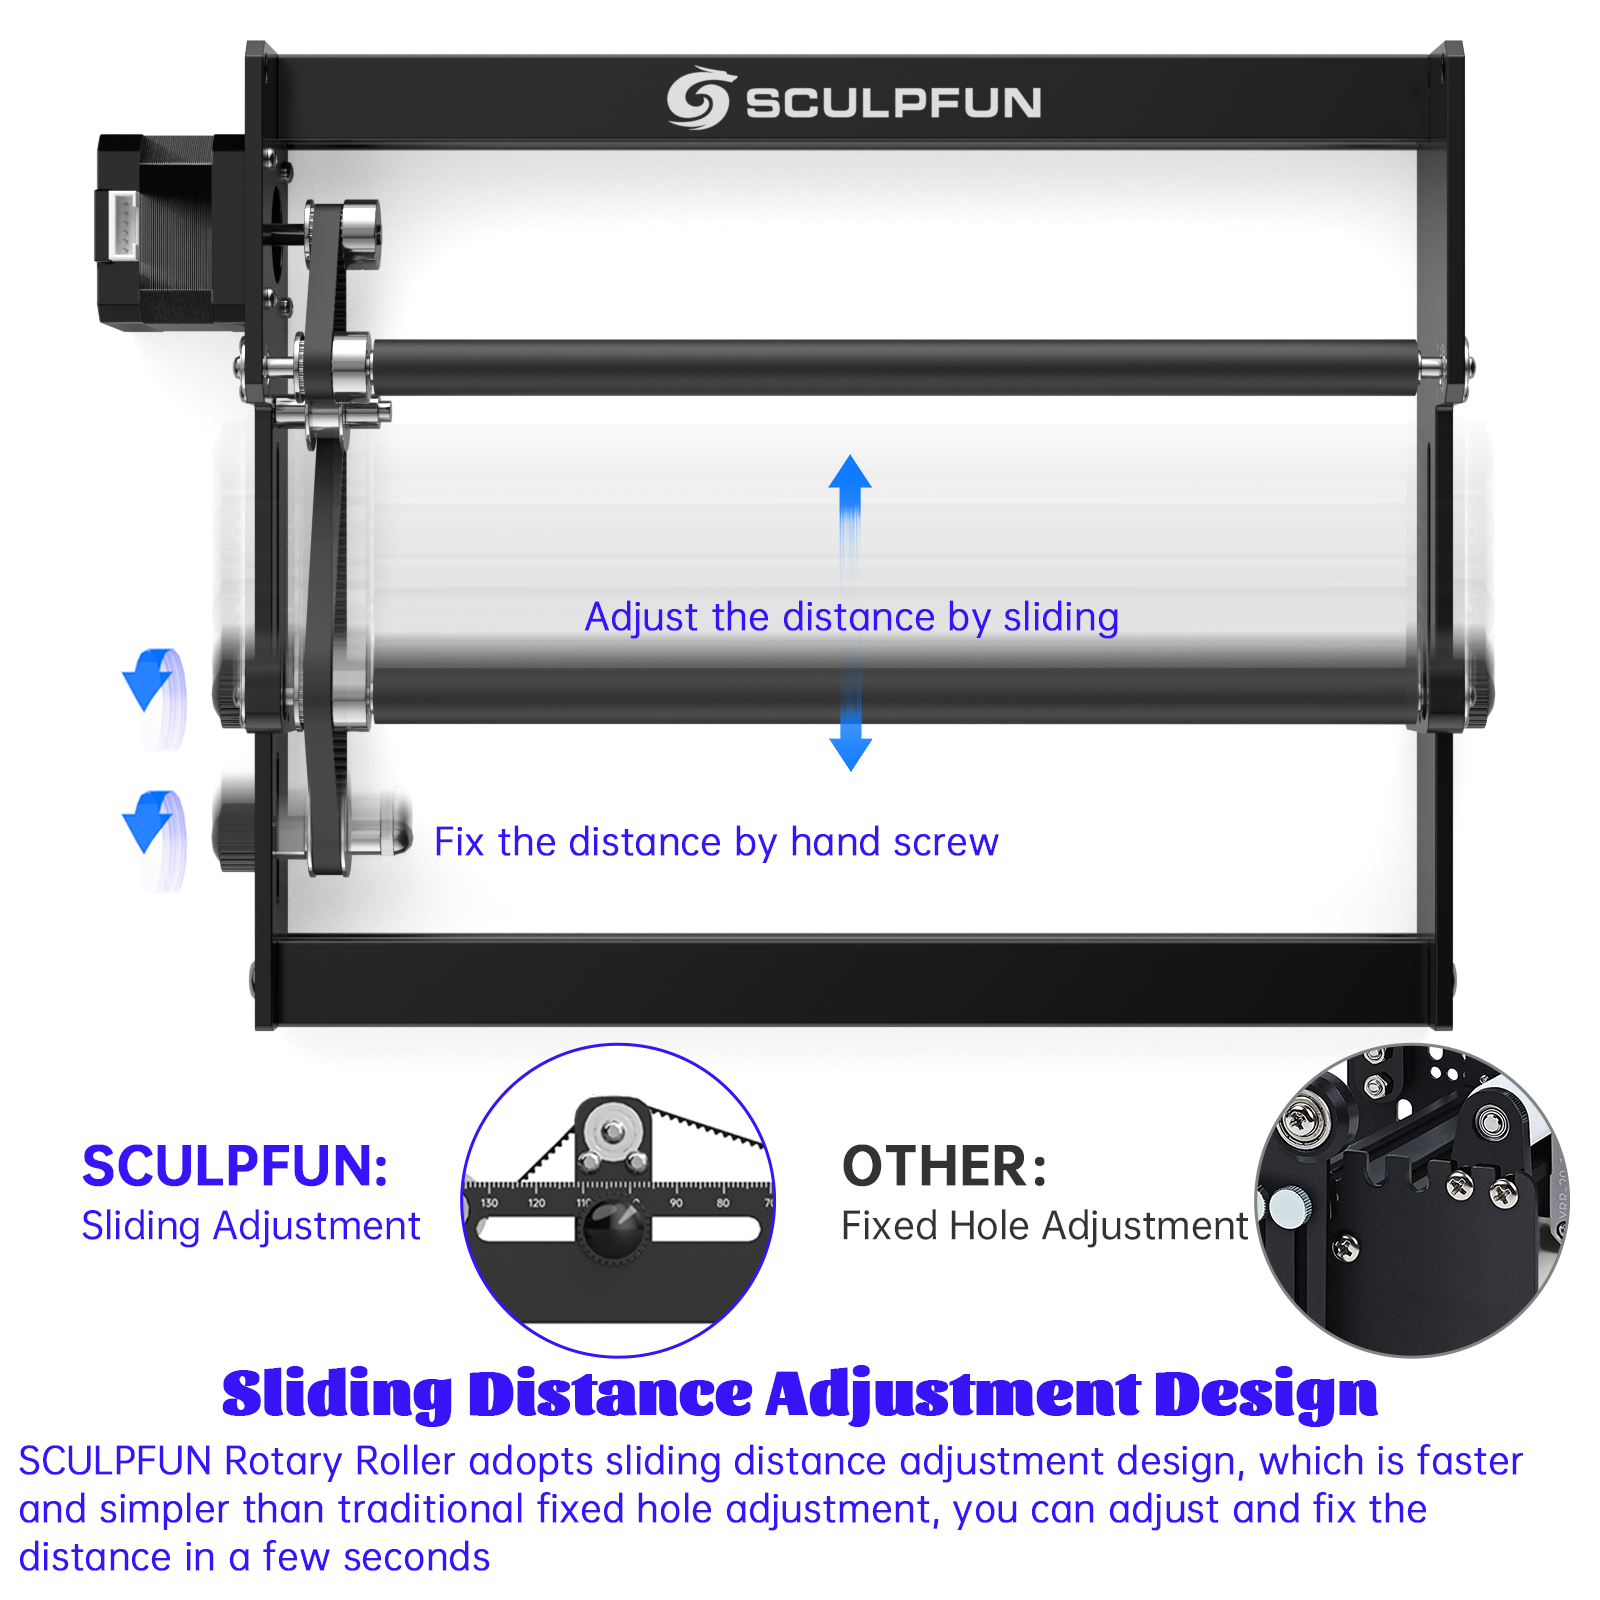 SCULPFUN-Laser-Rotary-Roller-for-S9-Laser-Engraver-Y-axis-Roller-360-degree-Rotating-for-6-150mm-Eng-1934417-7